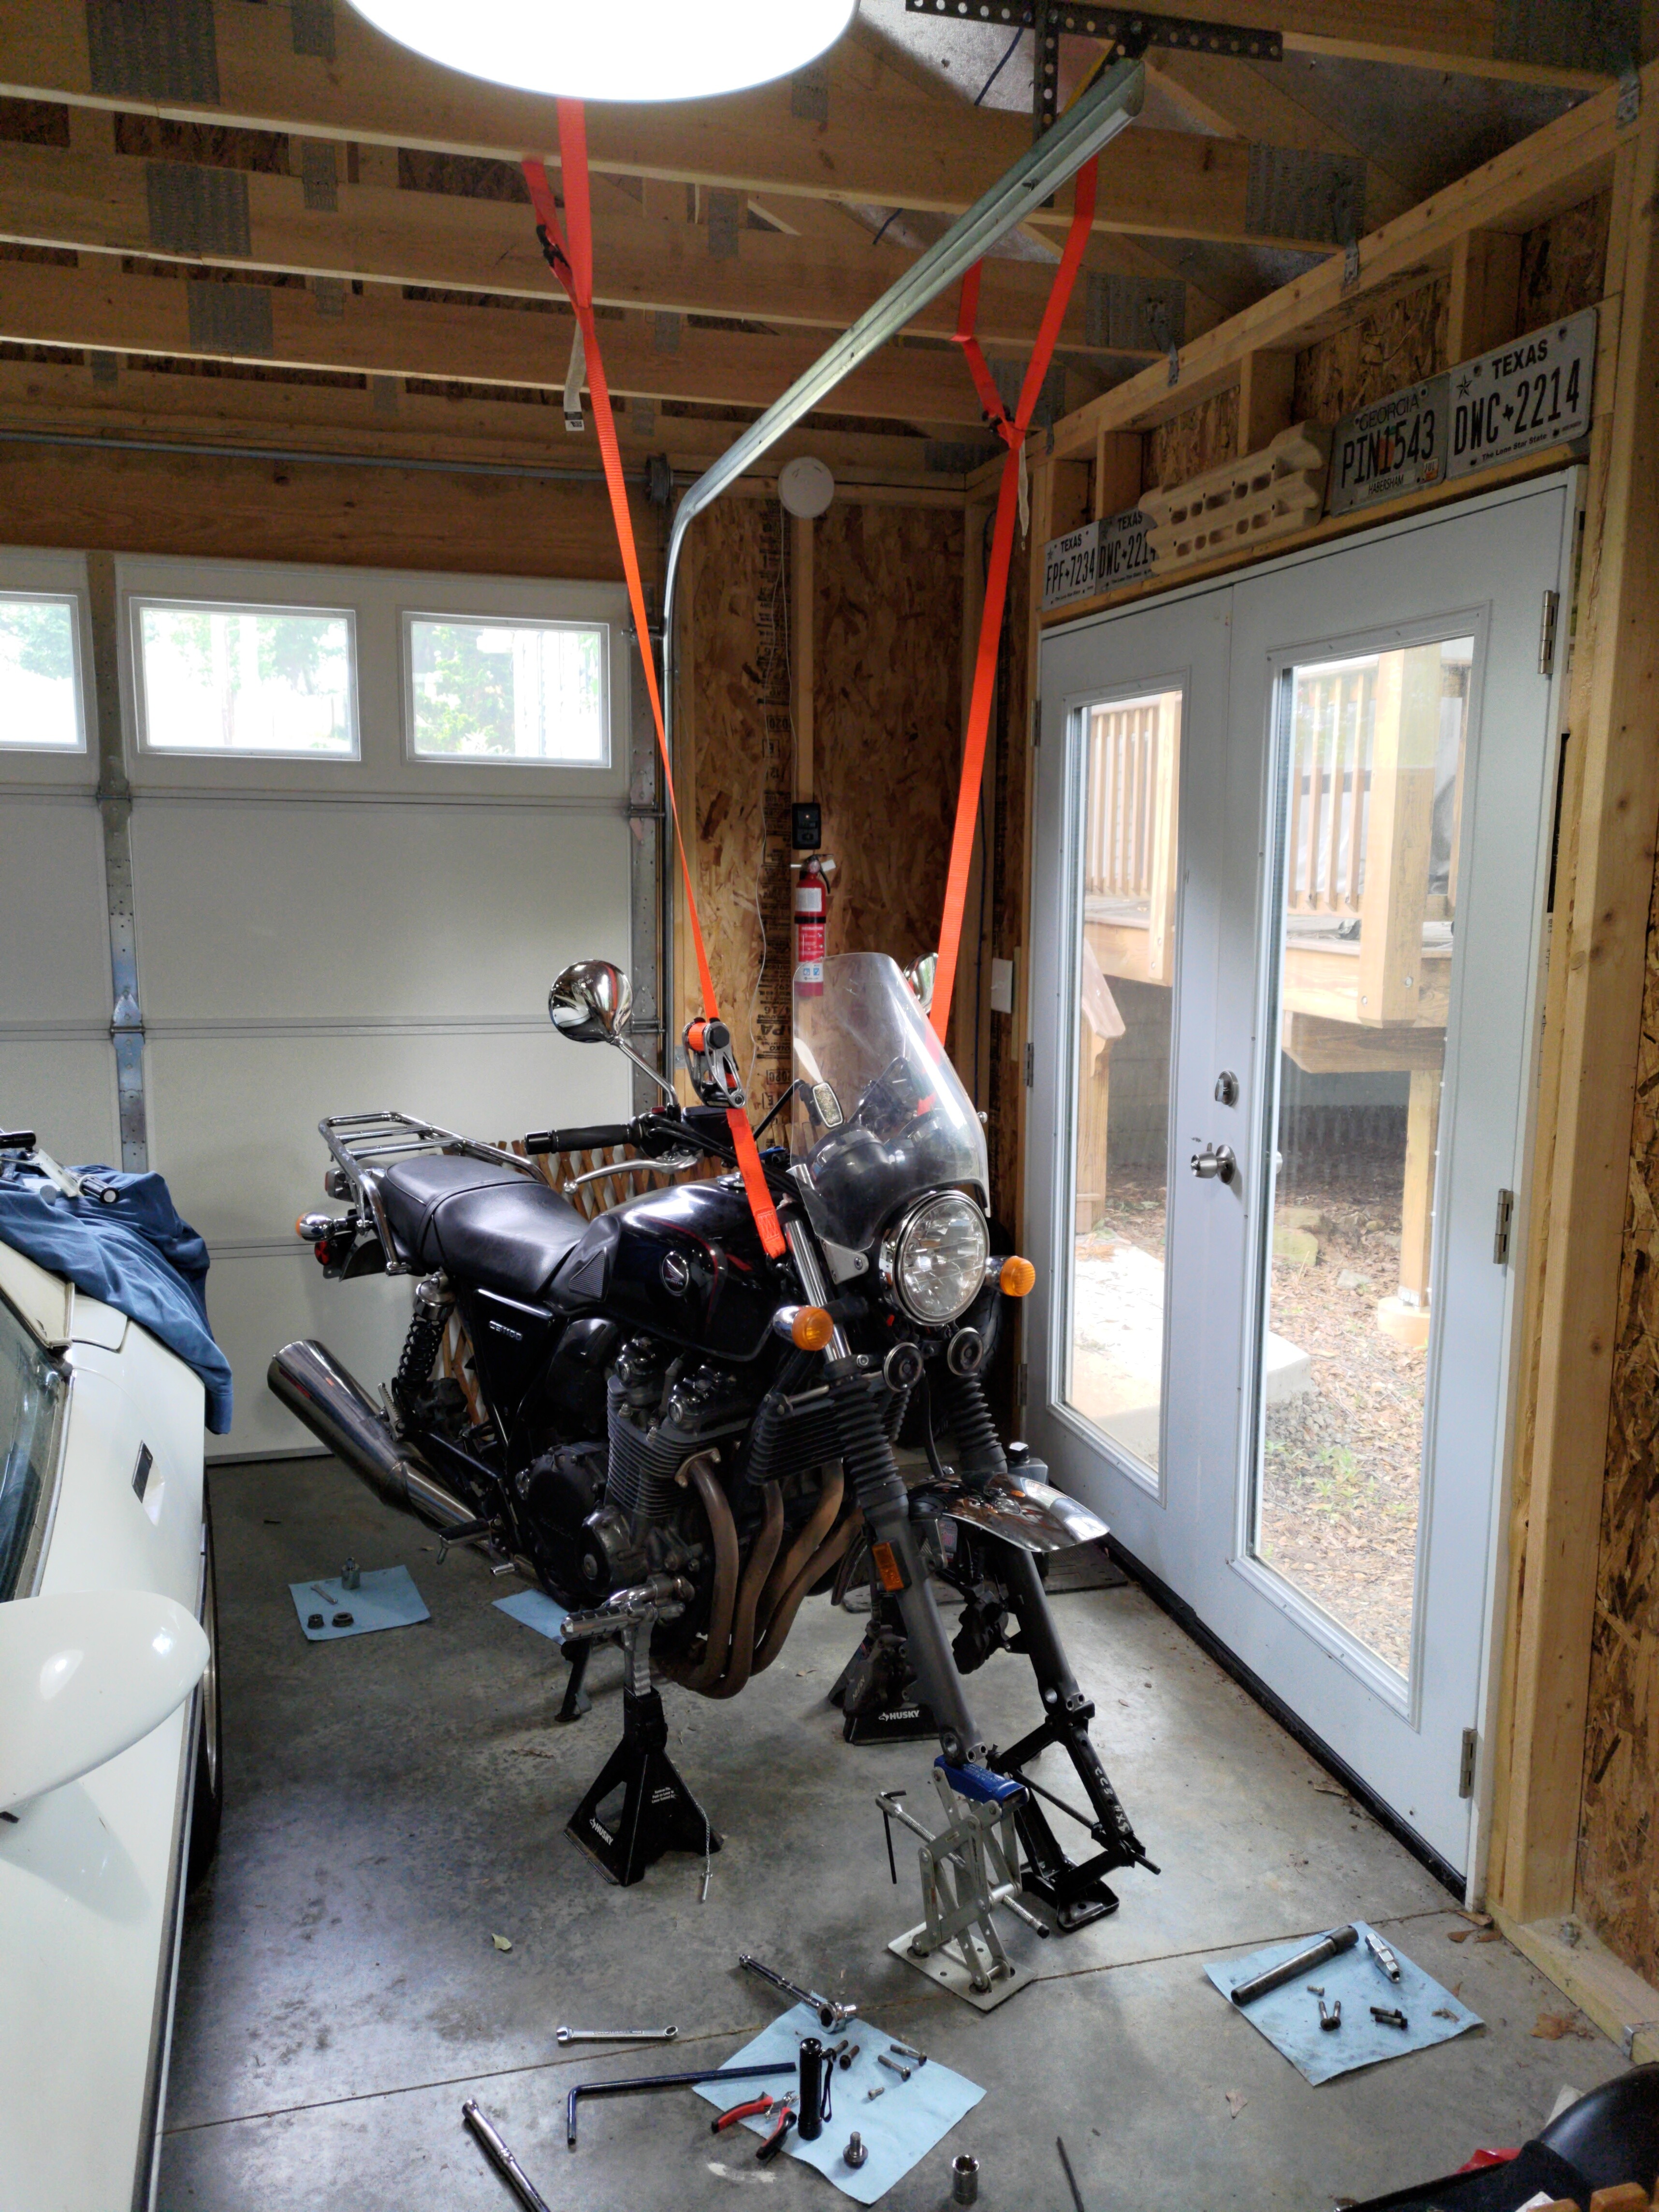 A motorcycle supported by its center stand and some ratchet straps looped over the ceiling joists and under the fork